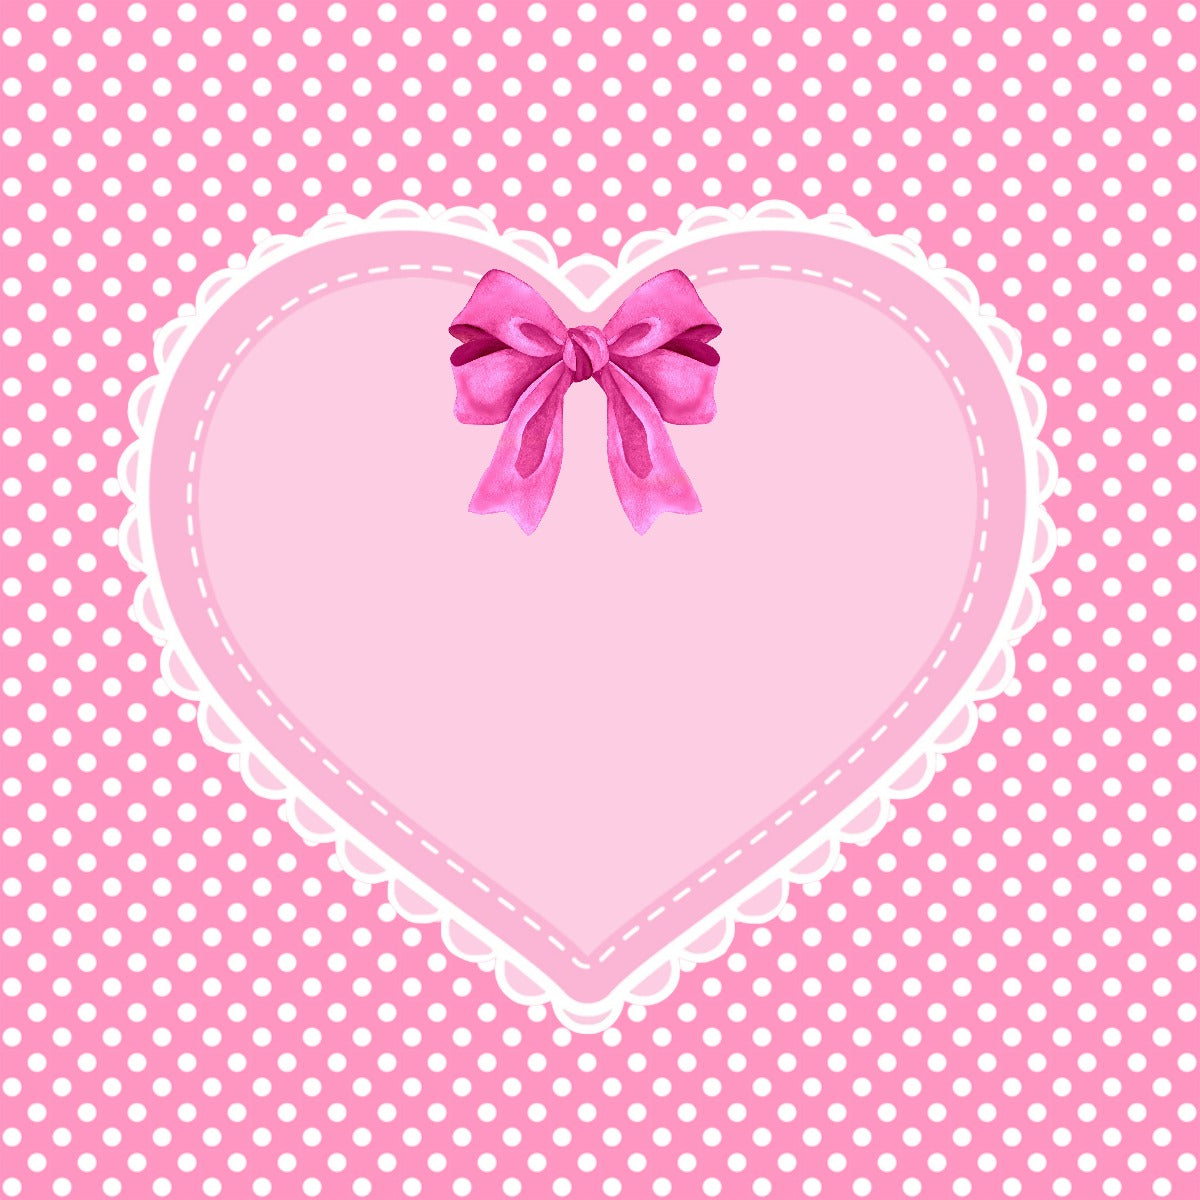 Pink Heart on Polkadots  12x12 Scrapbook Page, Frame or Background